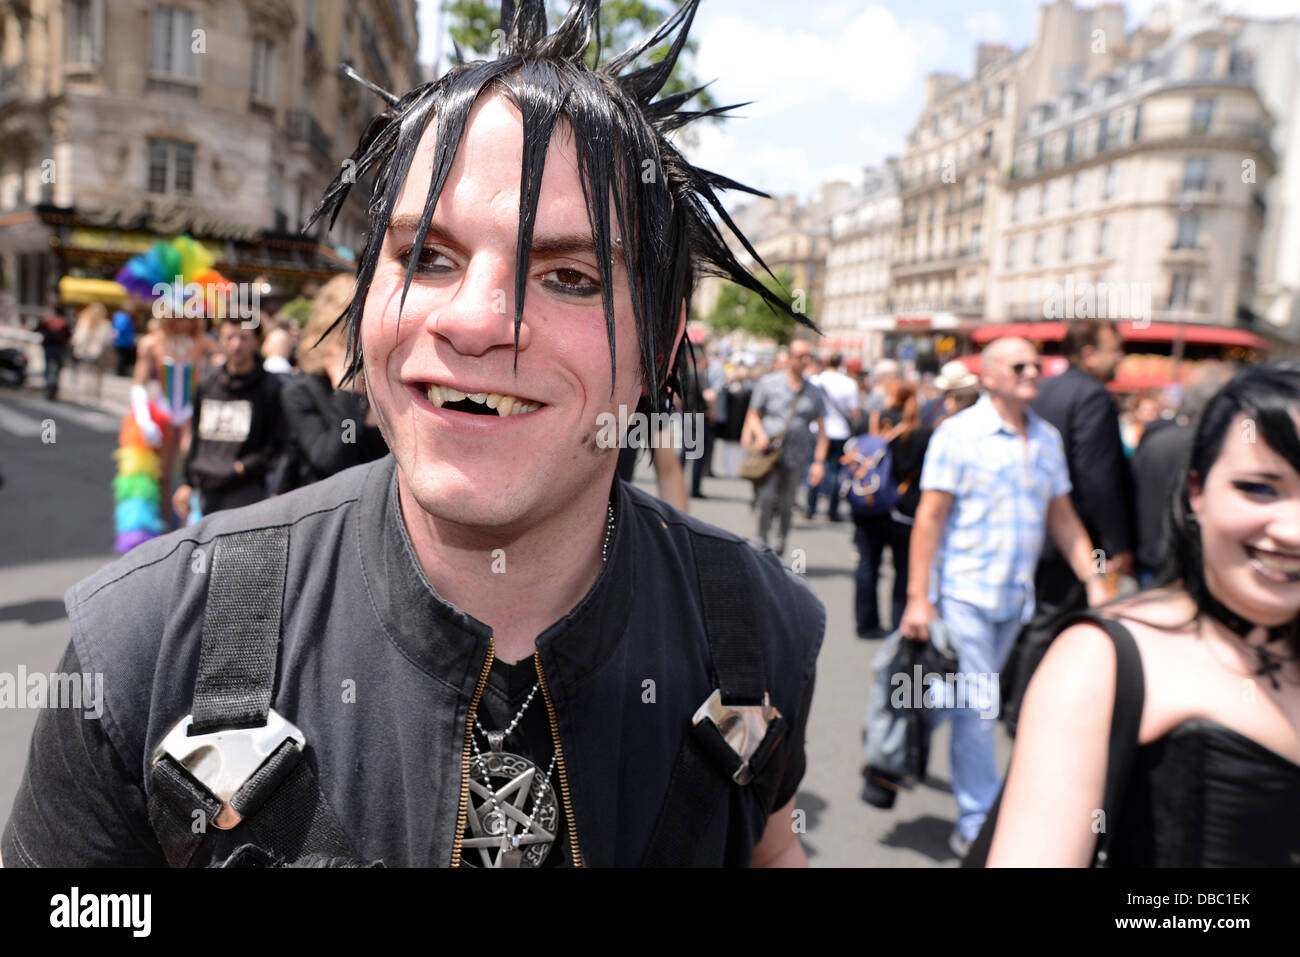 French punks take part in the Pride Parade in Paris, France. Stock Photo